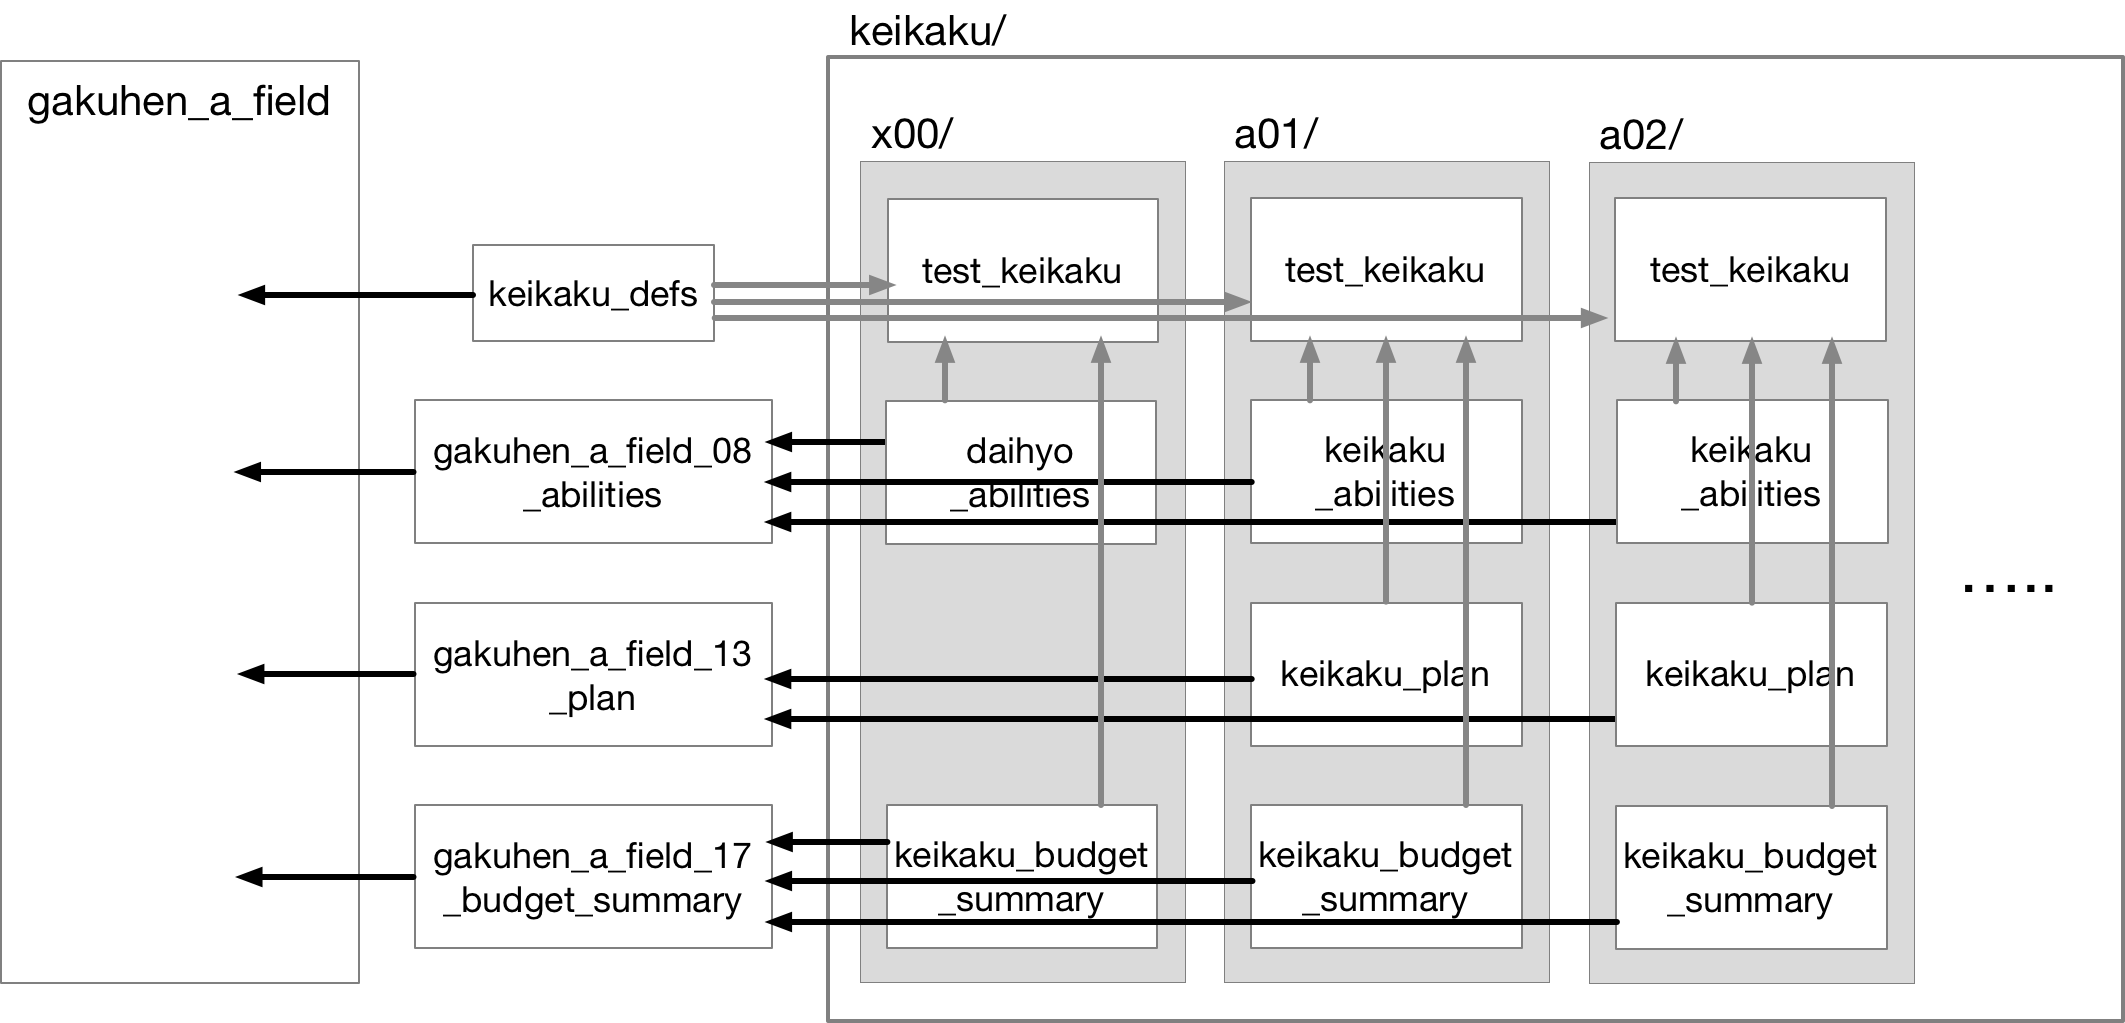 [Structure of files for gakuhen_a_field]